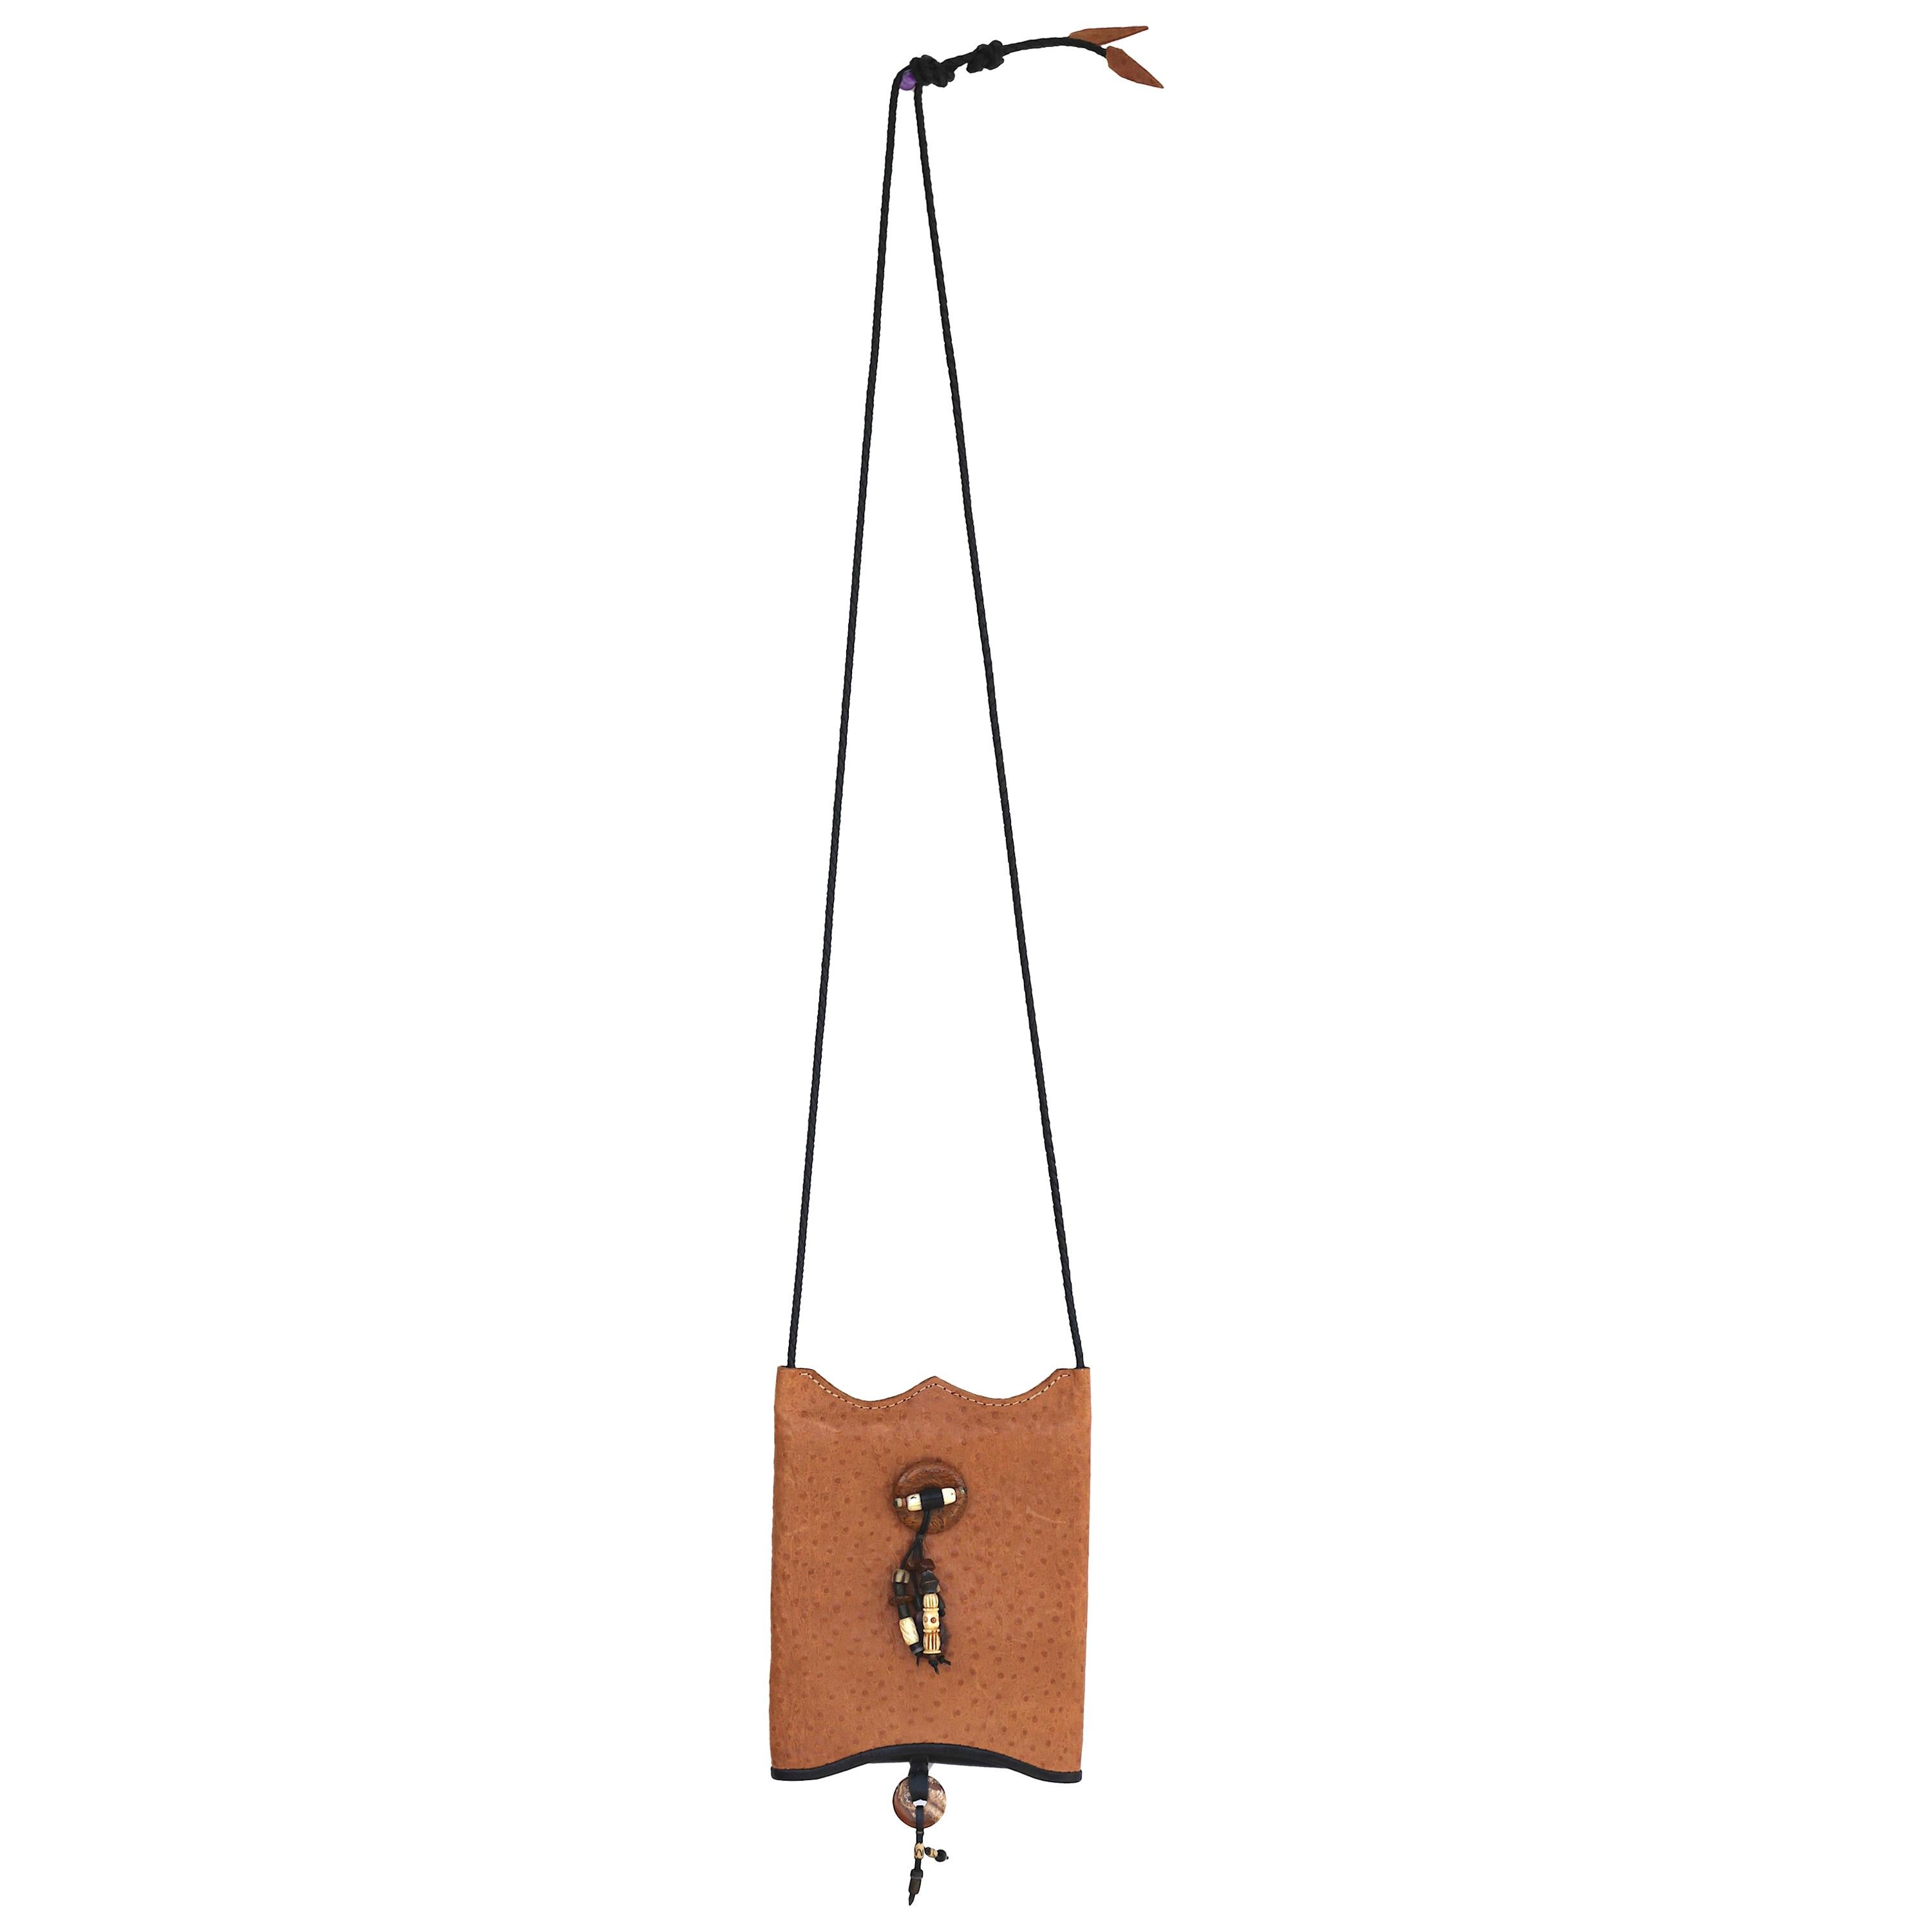 Save your back while safely traveling in sophisticated style.
A light weight Chic Vintage Exotic Tan Ostrich and Black Leather Crossbody Bag-holds your cellphone, some money, and a few credit cards, then go on your way safe and sound.
A Fashionable